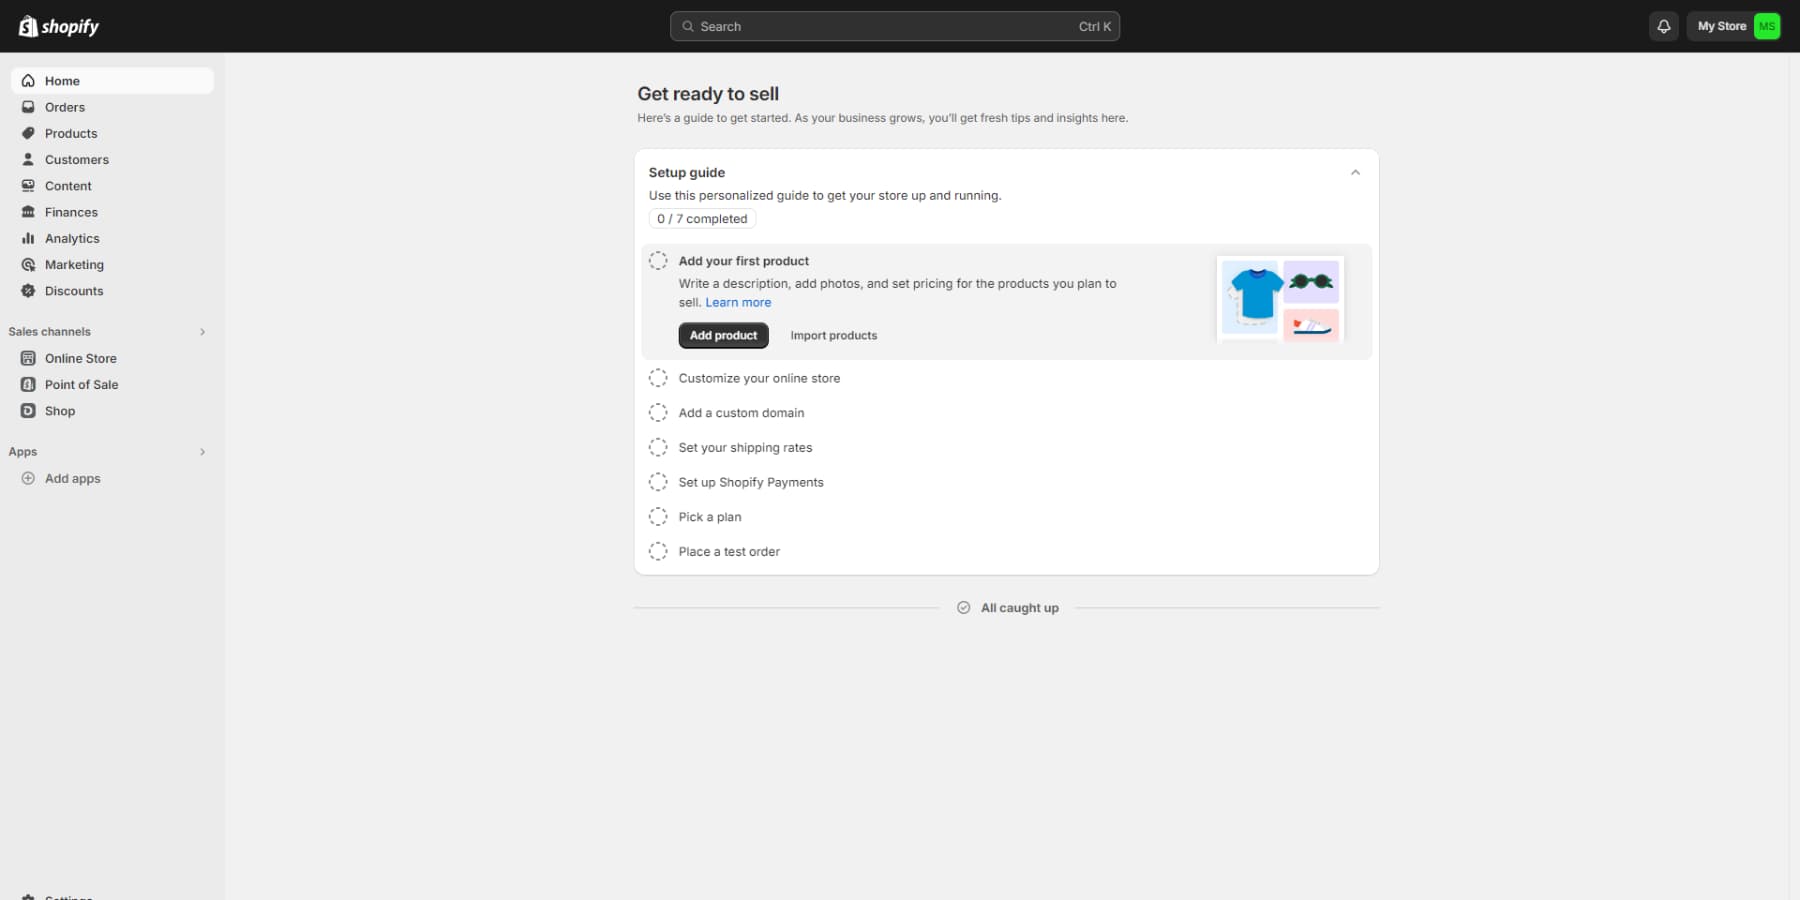 A screenshot of Shopify's backend